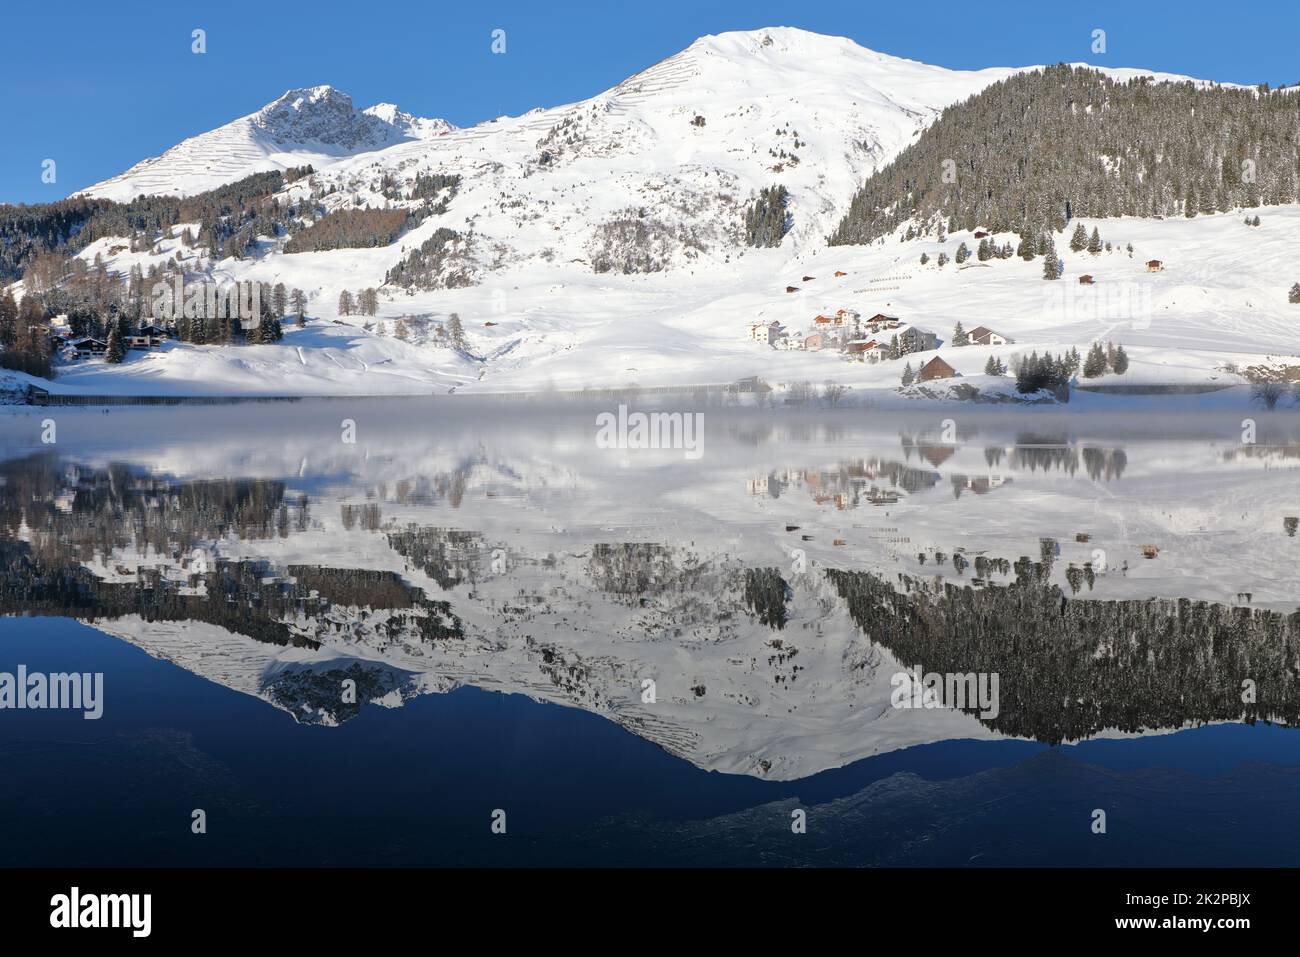 Panoramic view of winter scenery in the Alps with snowy mountain summits reflecting in mountain lake Stock Photo